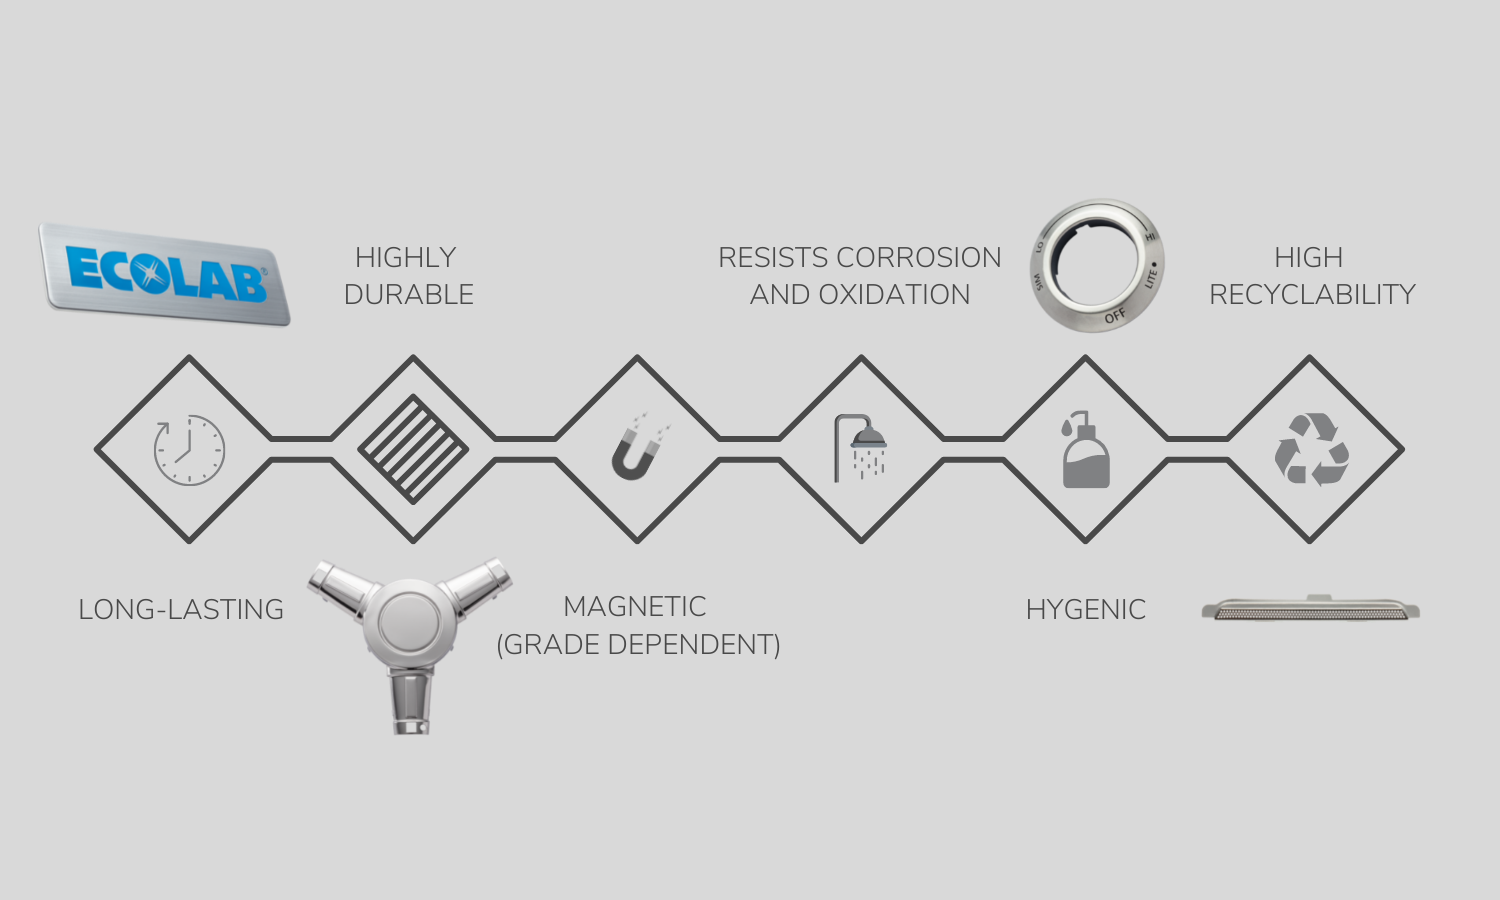 a list of attributes for stainless steel - long-lasting, highly durable, magnetic (grade dependent), resists corrosion and oxidation, hygenic, and high recyclability - each attribute has infographics associated with them